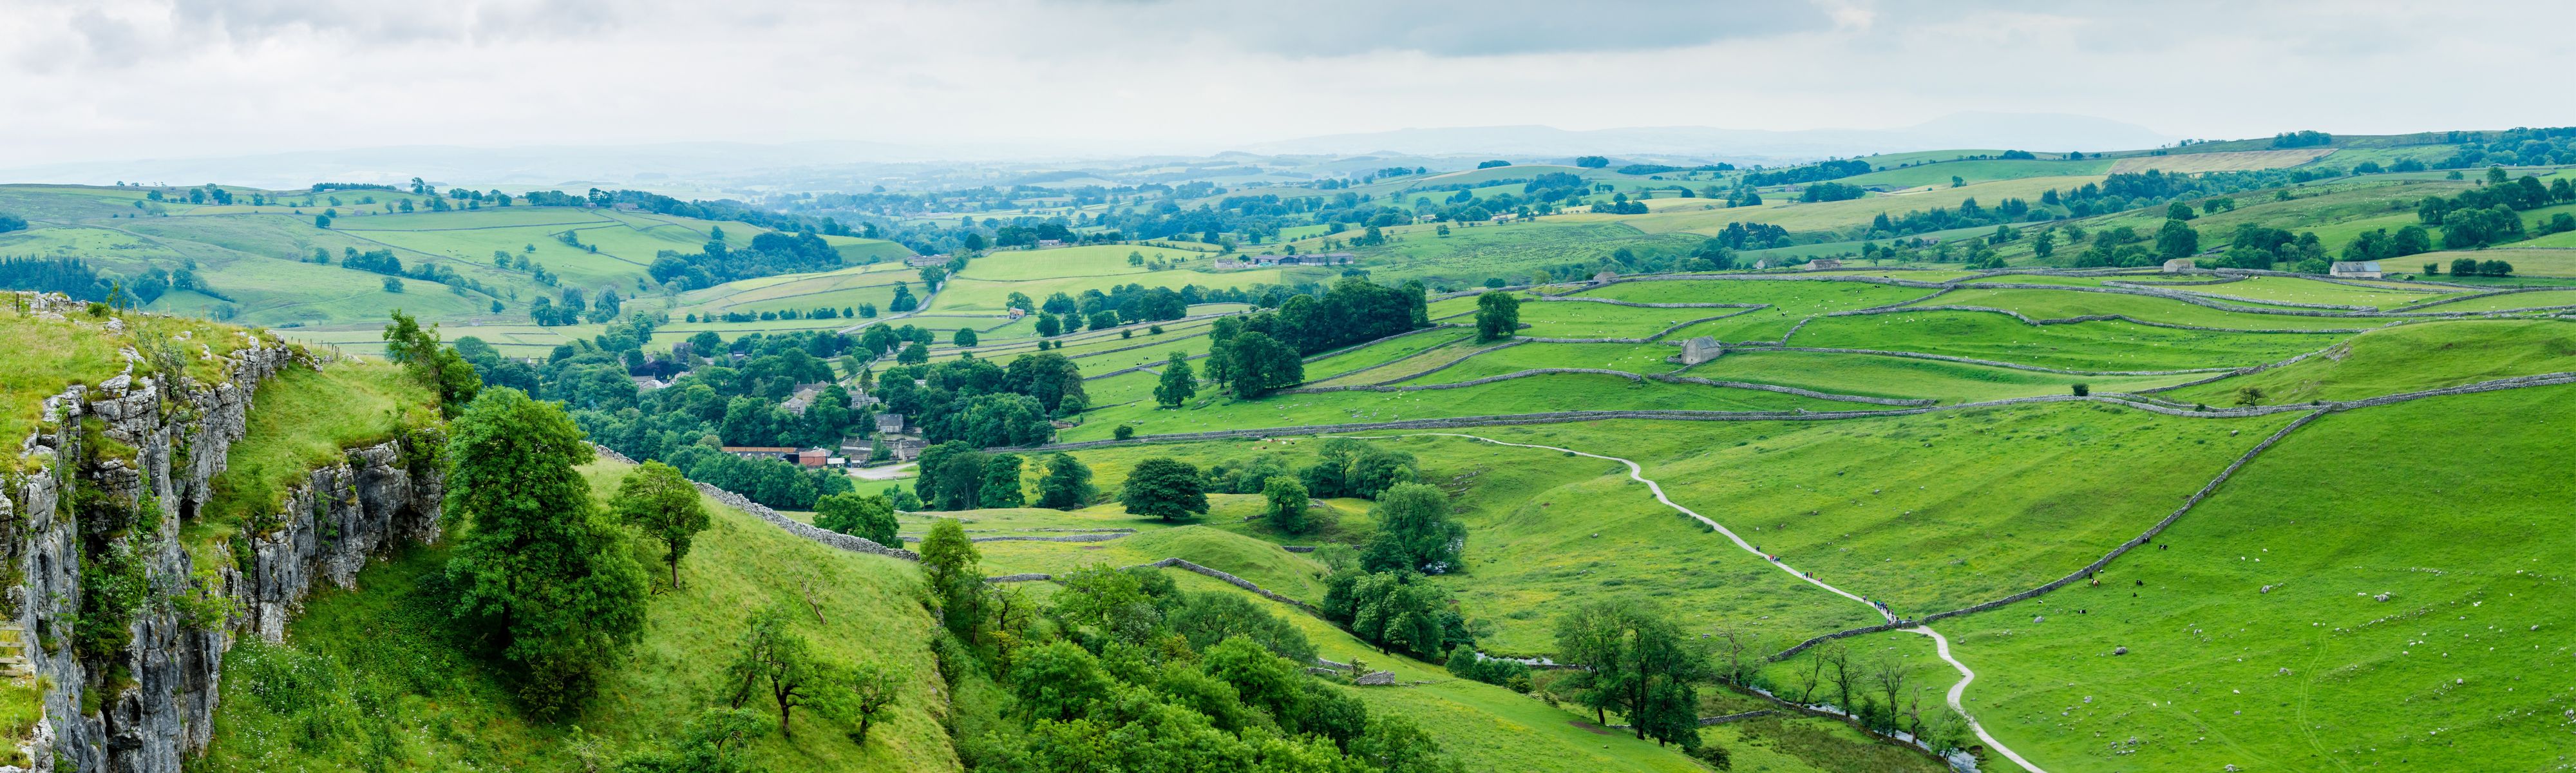 lush green valleys of yorkshire in the united kingdom